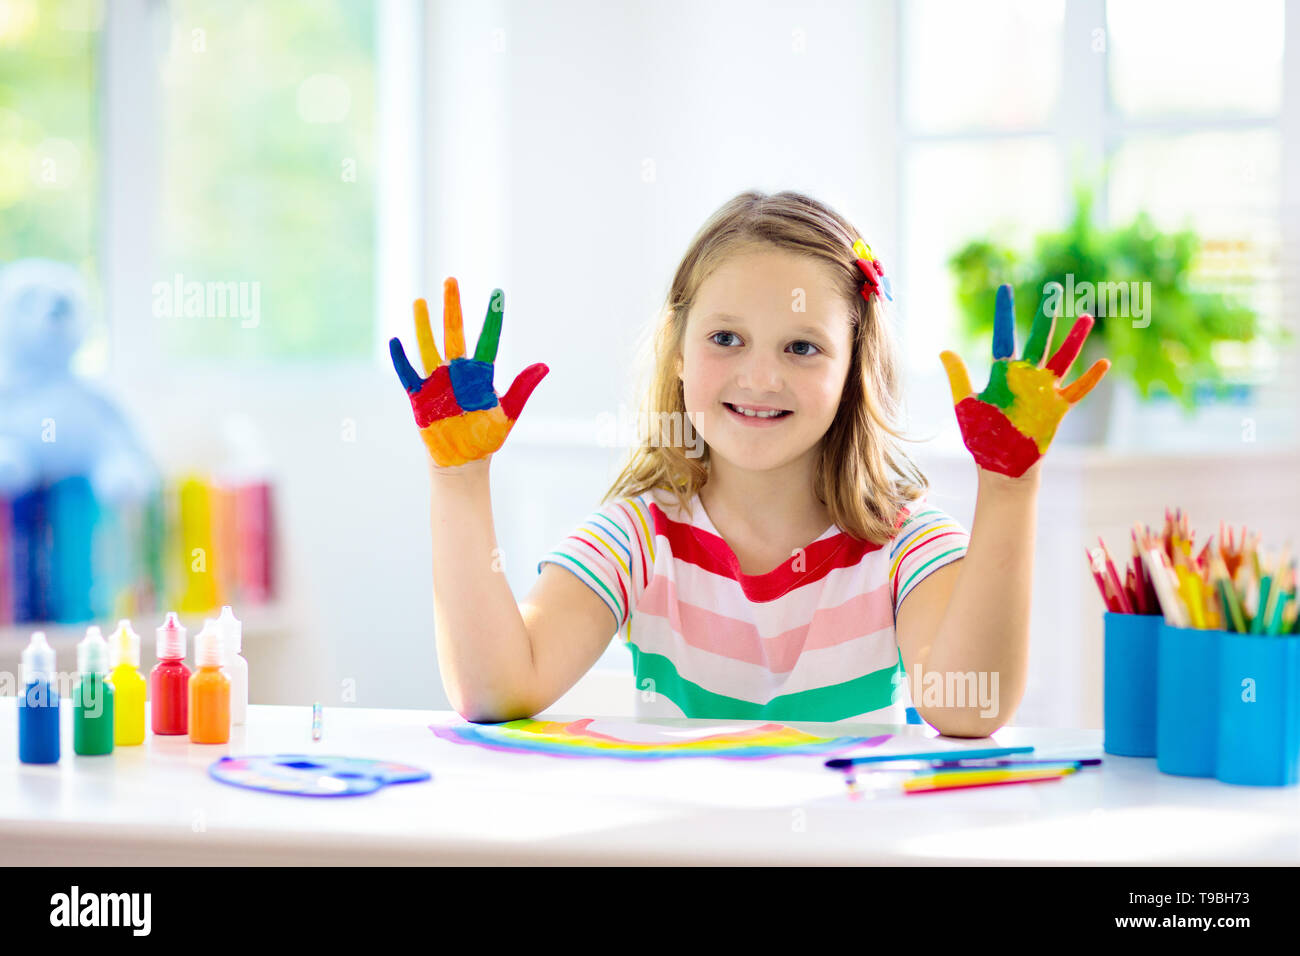 Kids Paint. Child Painting In White Sunny Study Room. Little Girl Drawing  Rainbow. School Kid Doing Art Homework. Arts And Crafts For Kids. Paint On  Children Hands. Creative Little Artist At Work.